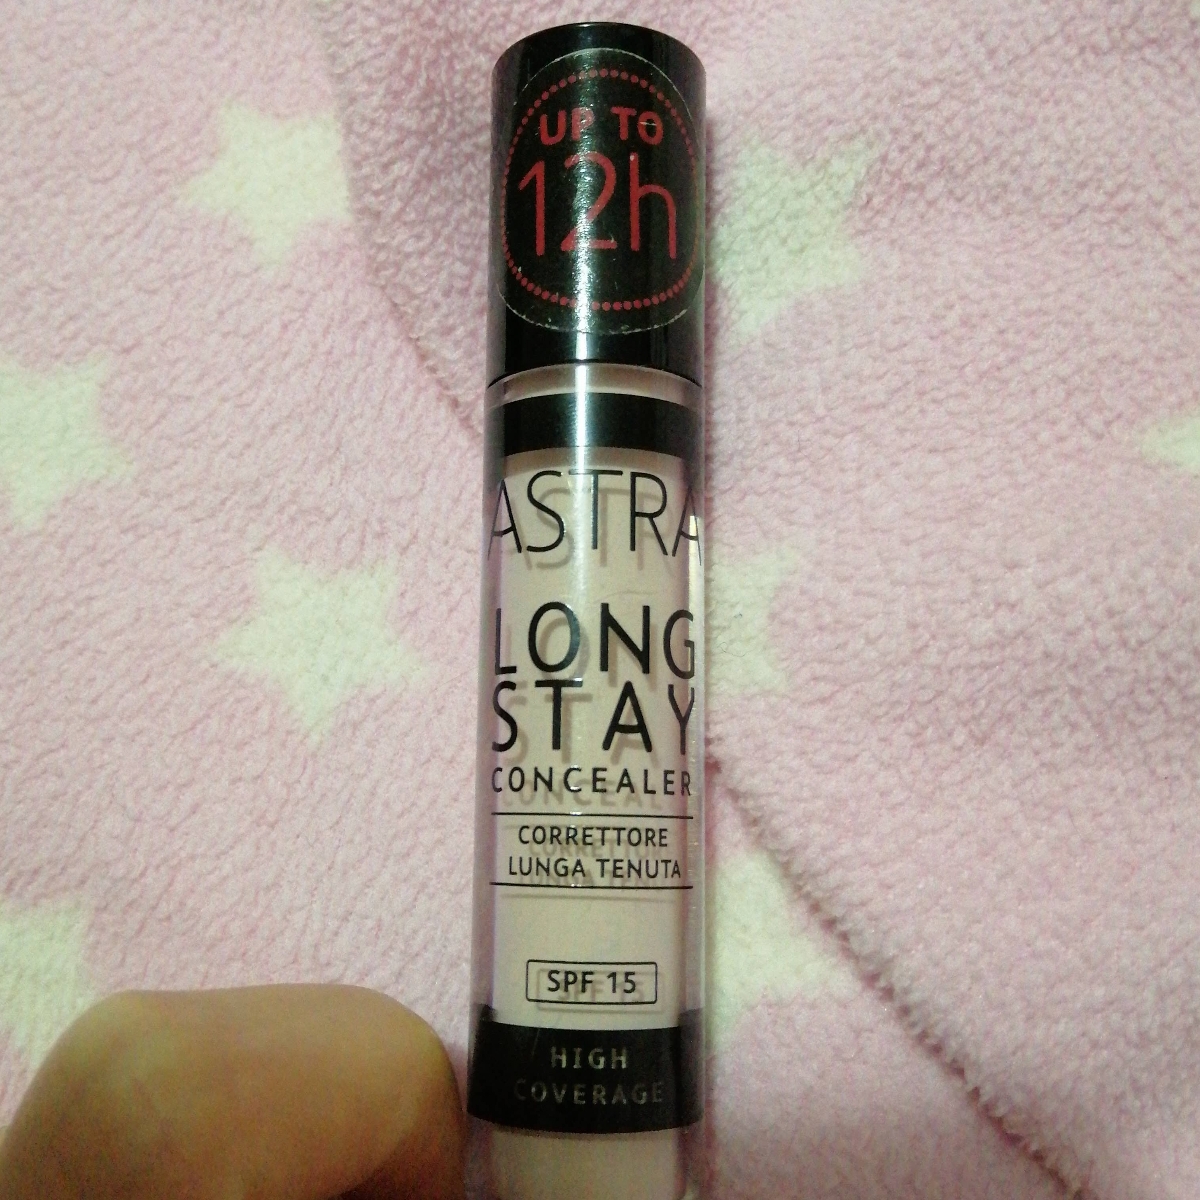 Astra Long stay concealer Reviews | abillion